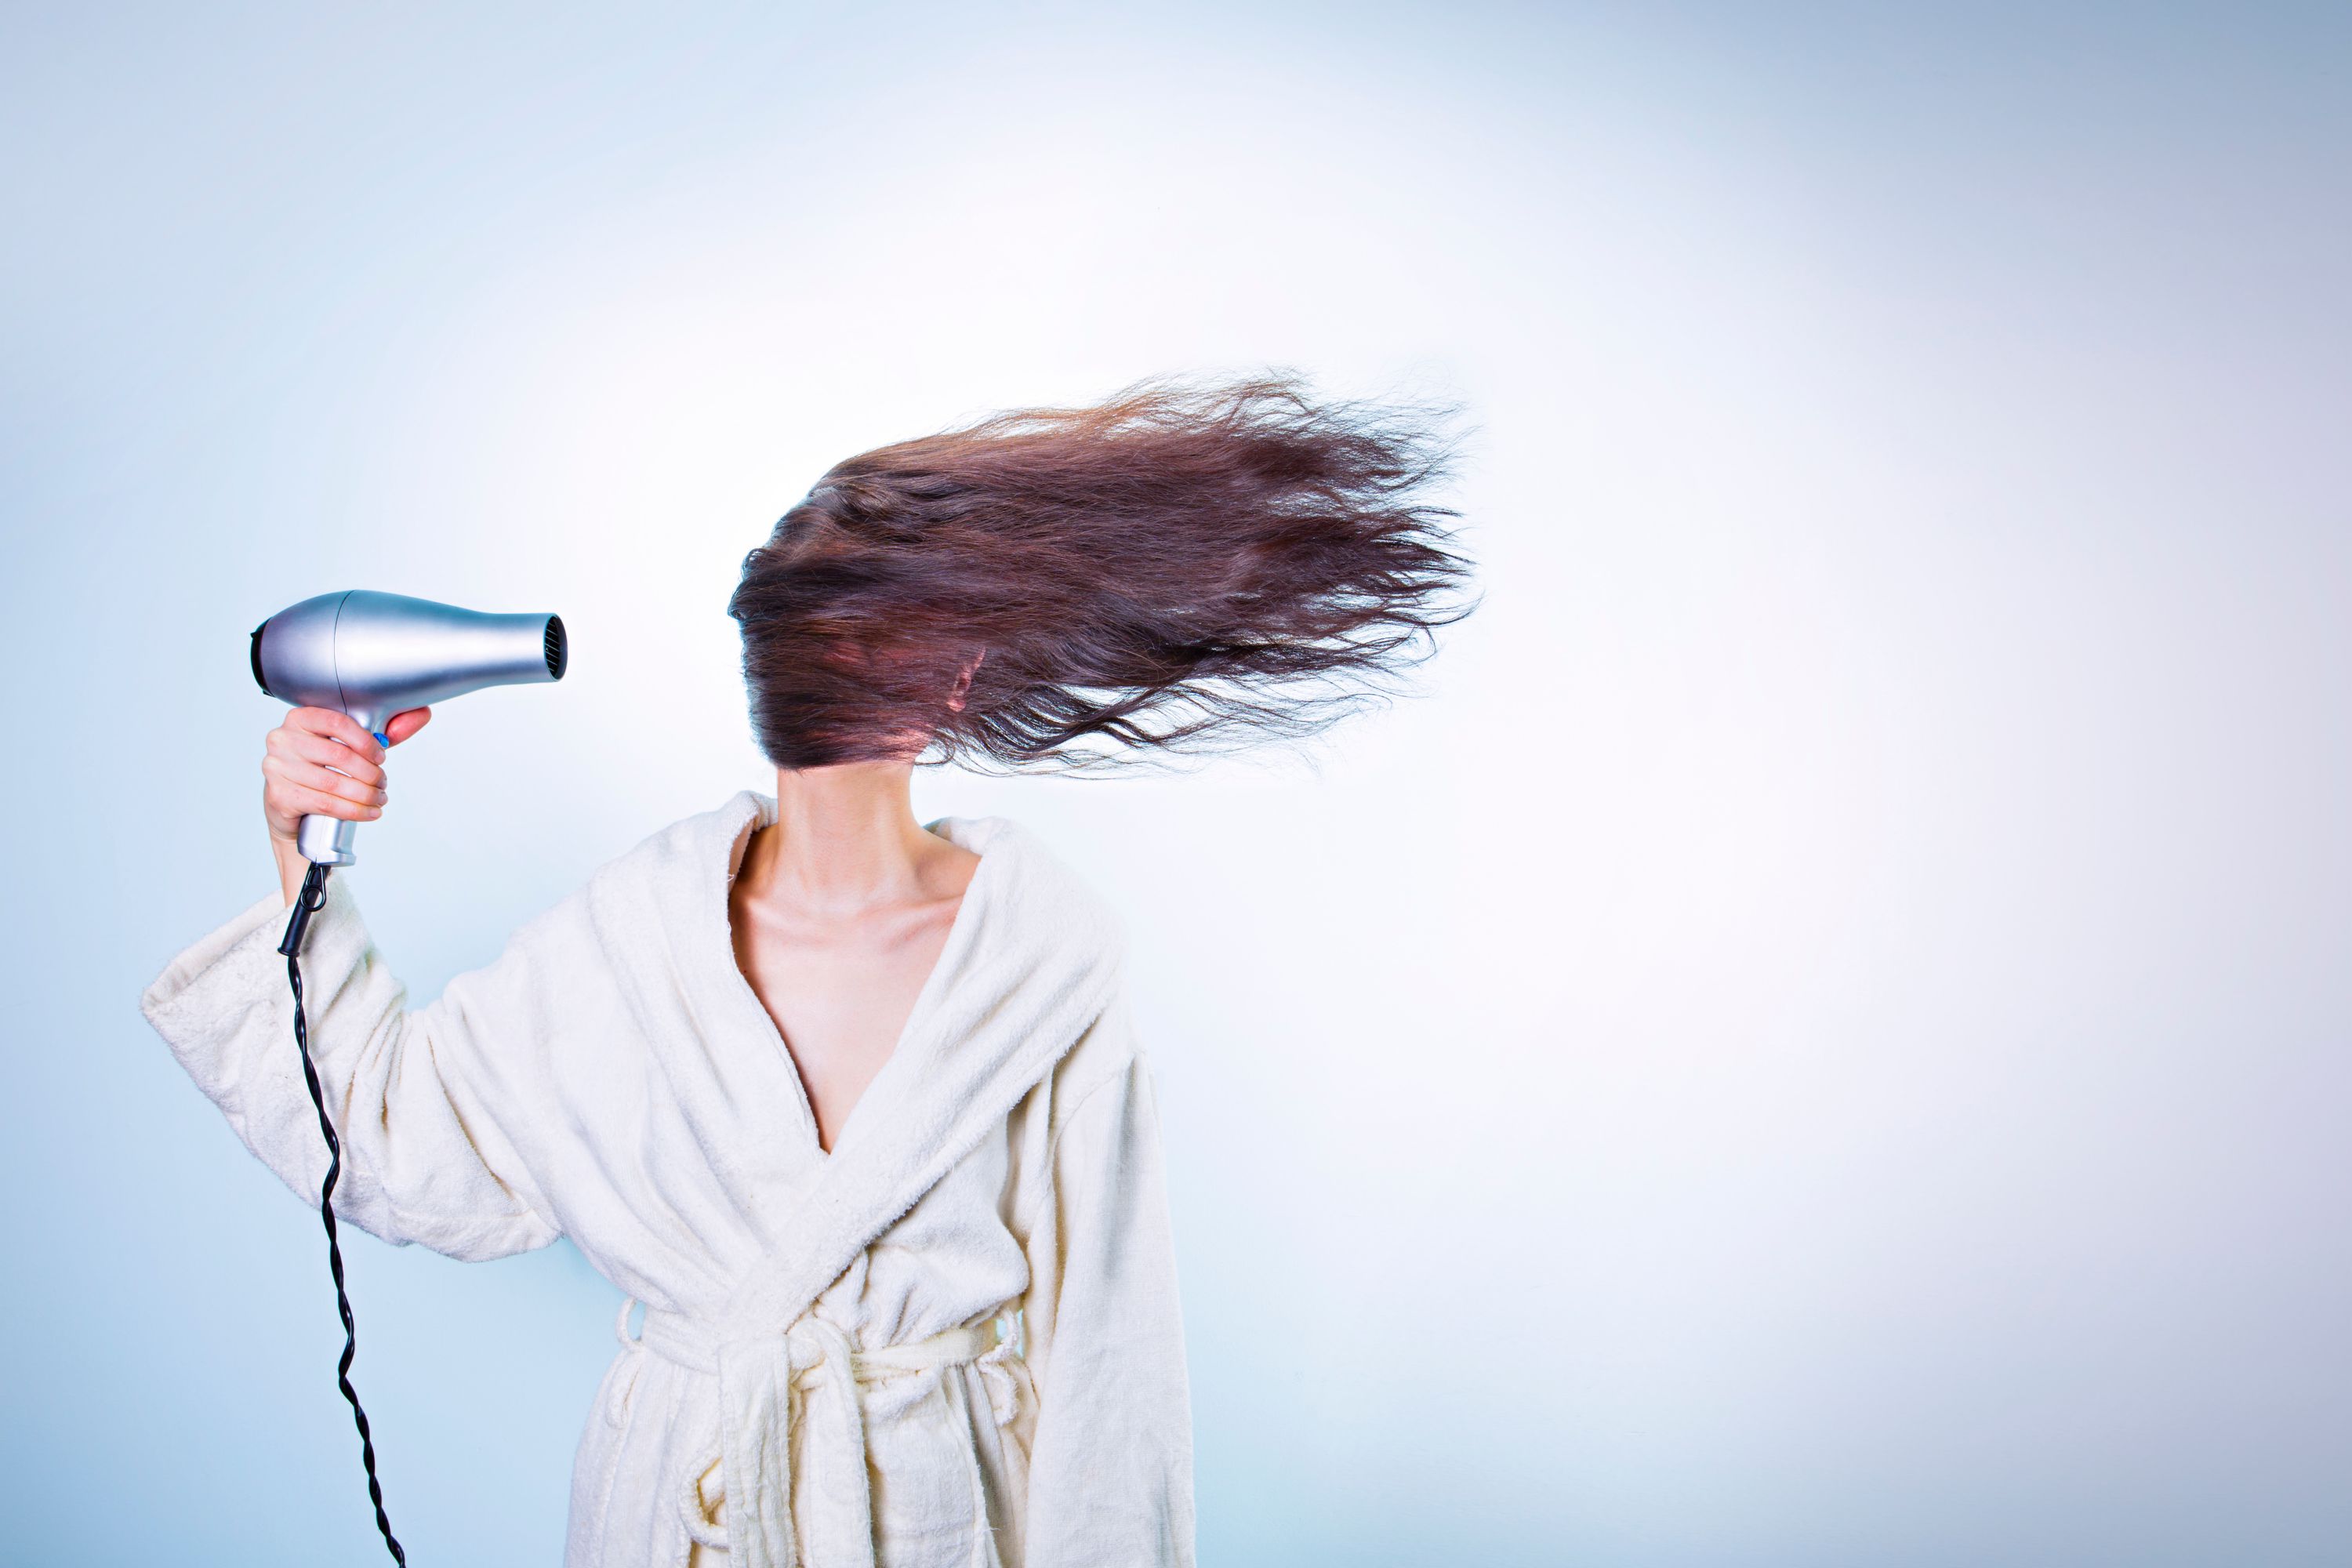 Every Hong Kong hair problem, answered once and for all